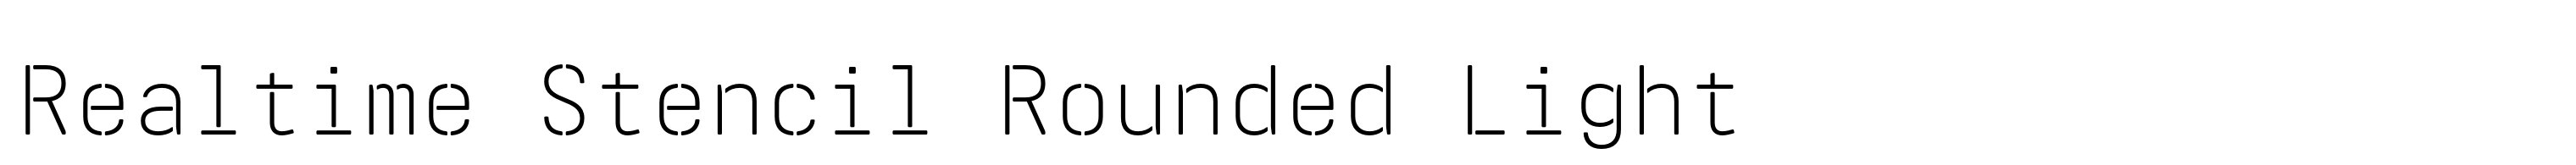 Realtime Stencil Rounded Light